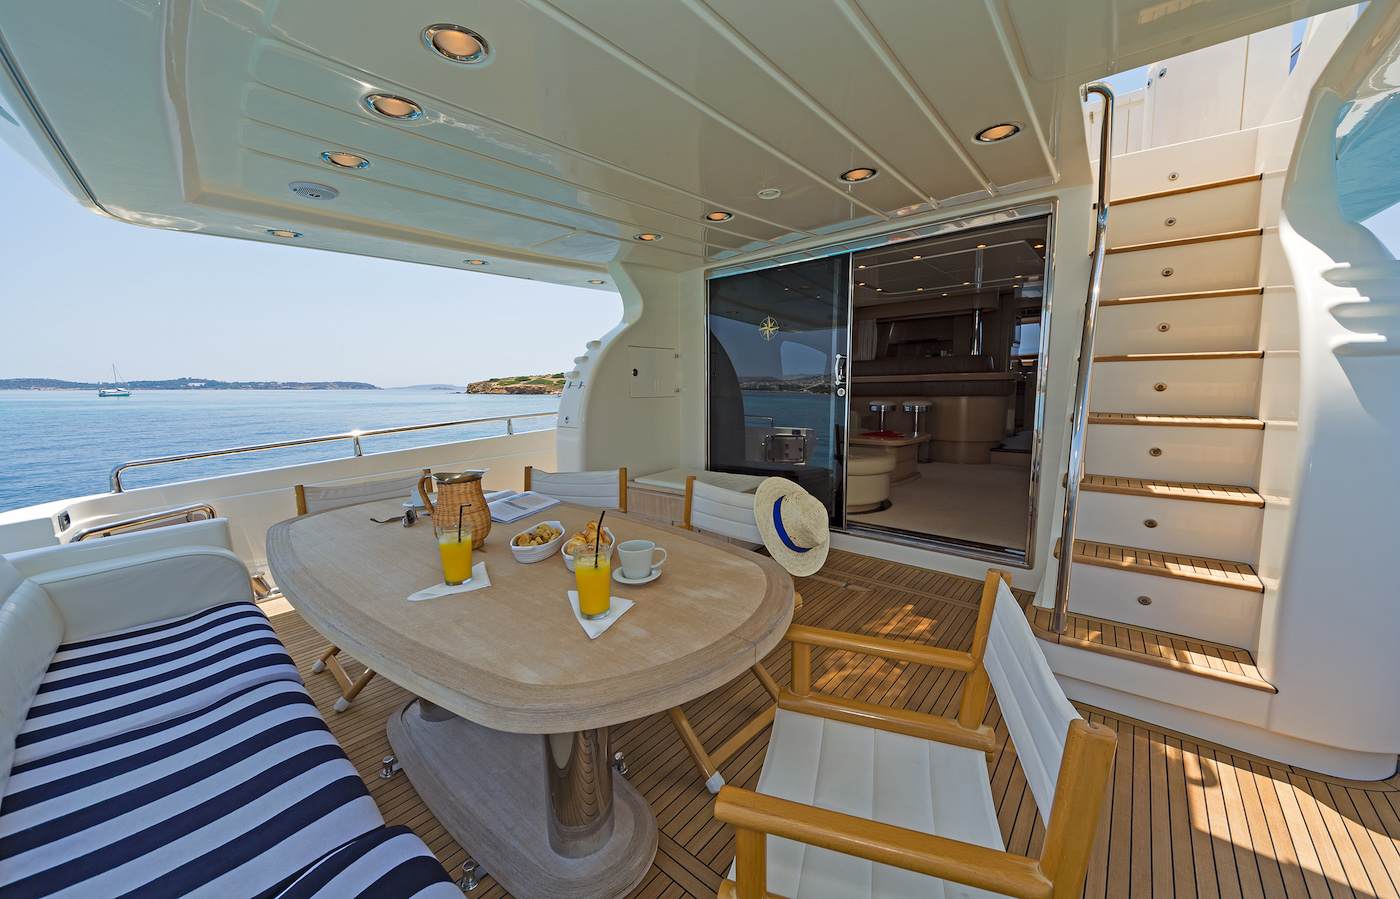 Alfresco Dining Table On Aft Deck